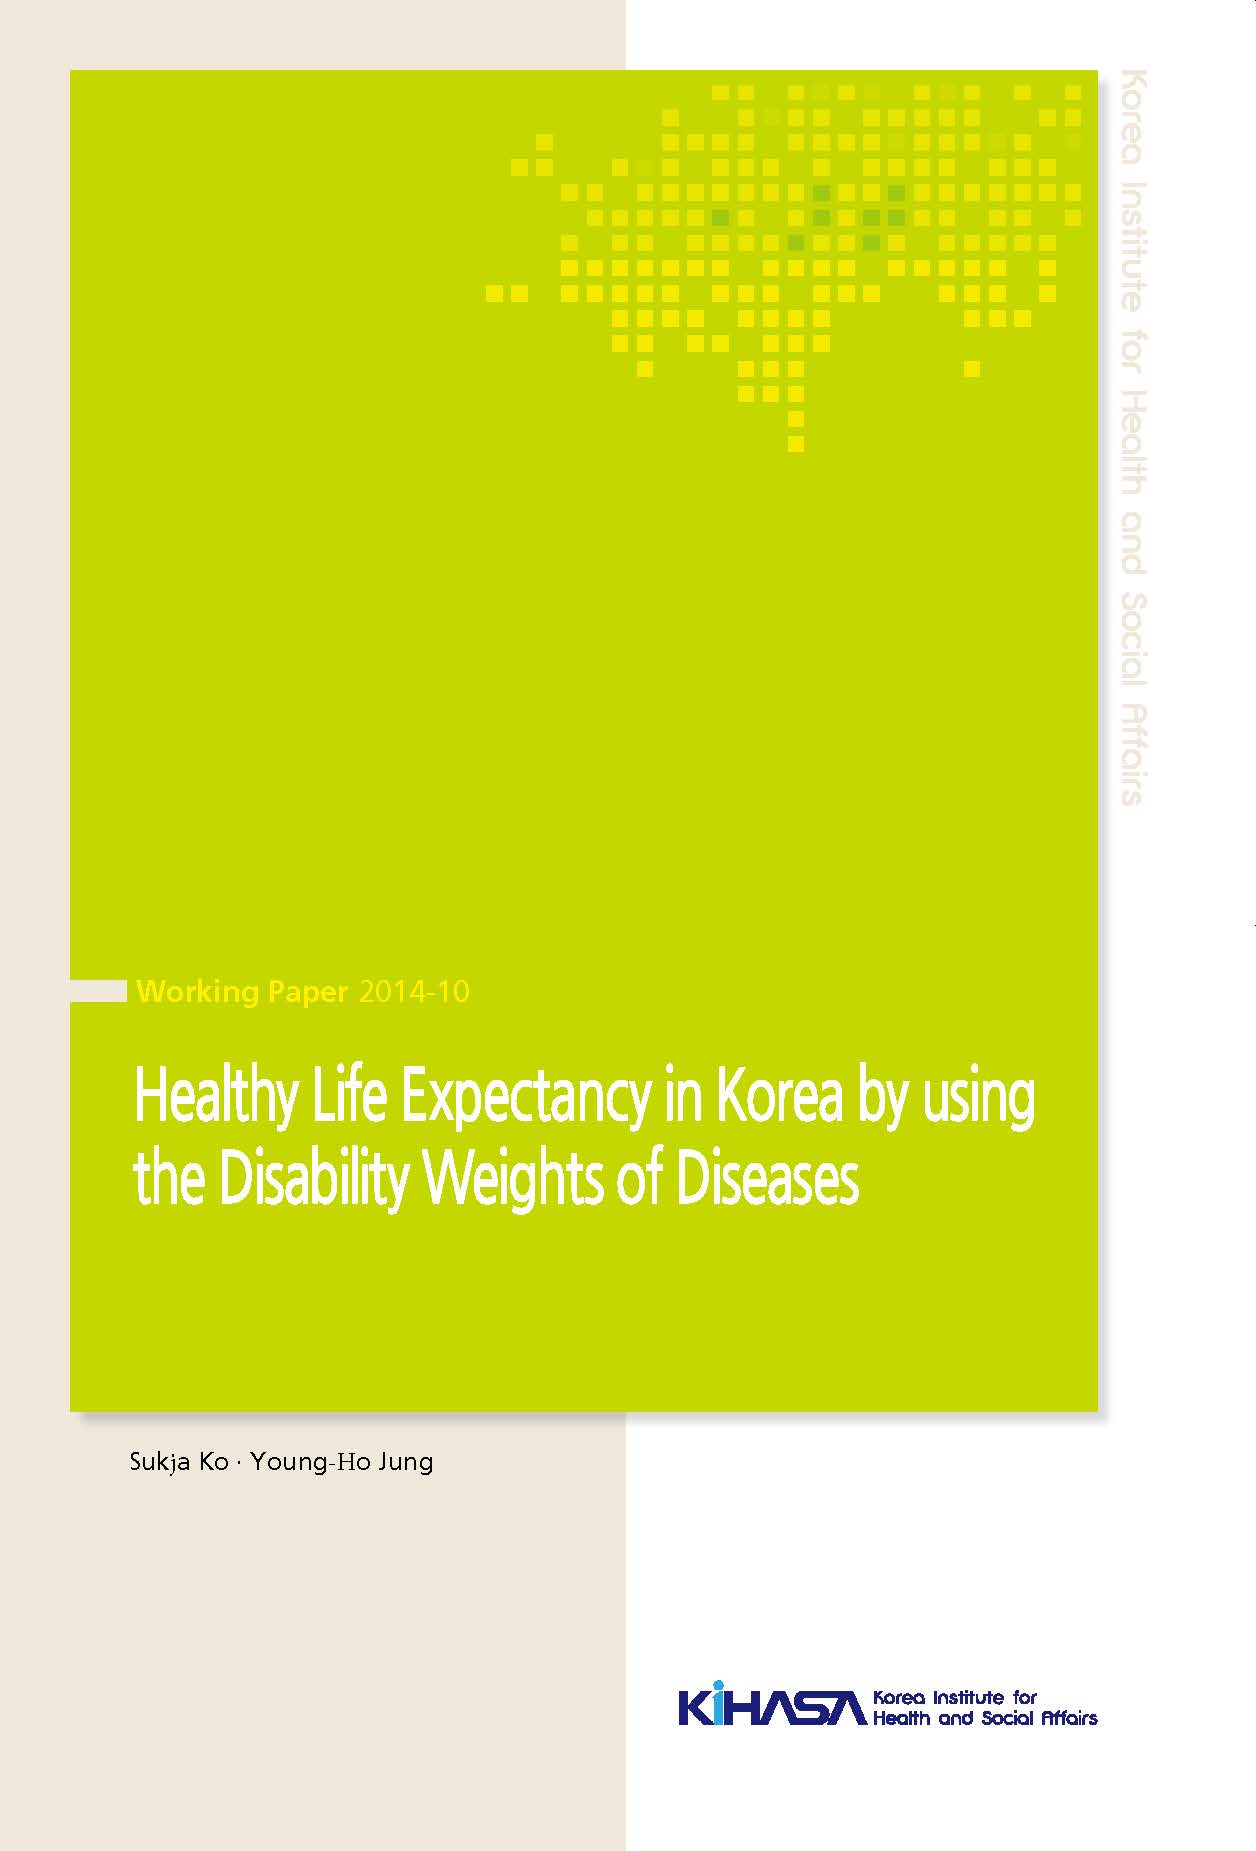 Healthy Life Expectancy in Korea by using the Disability Weights of Diseases